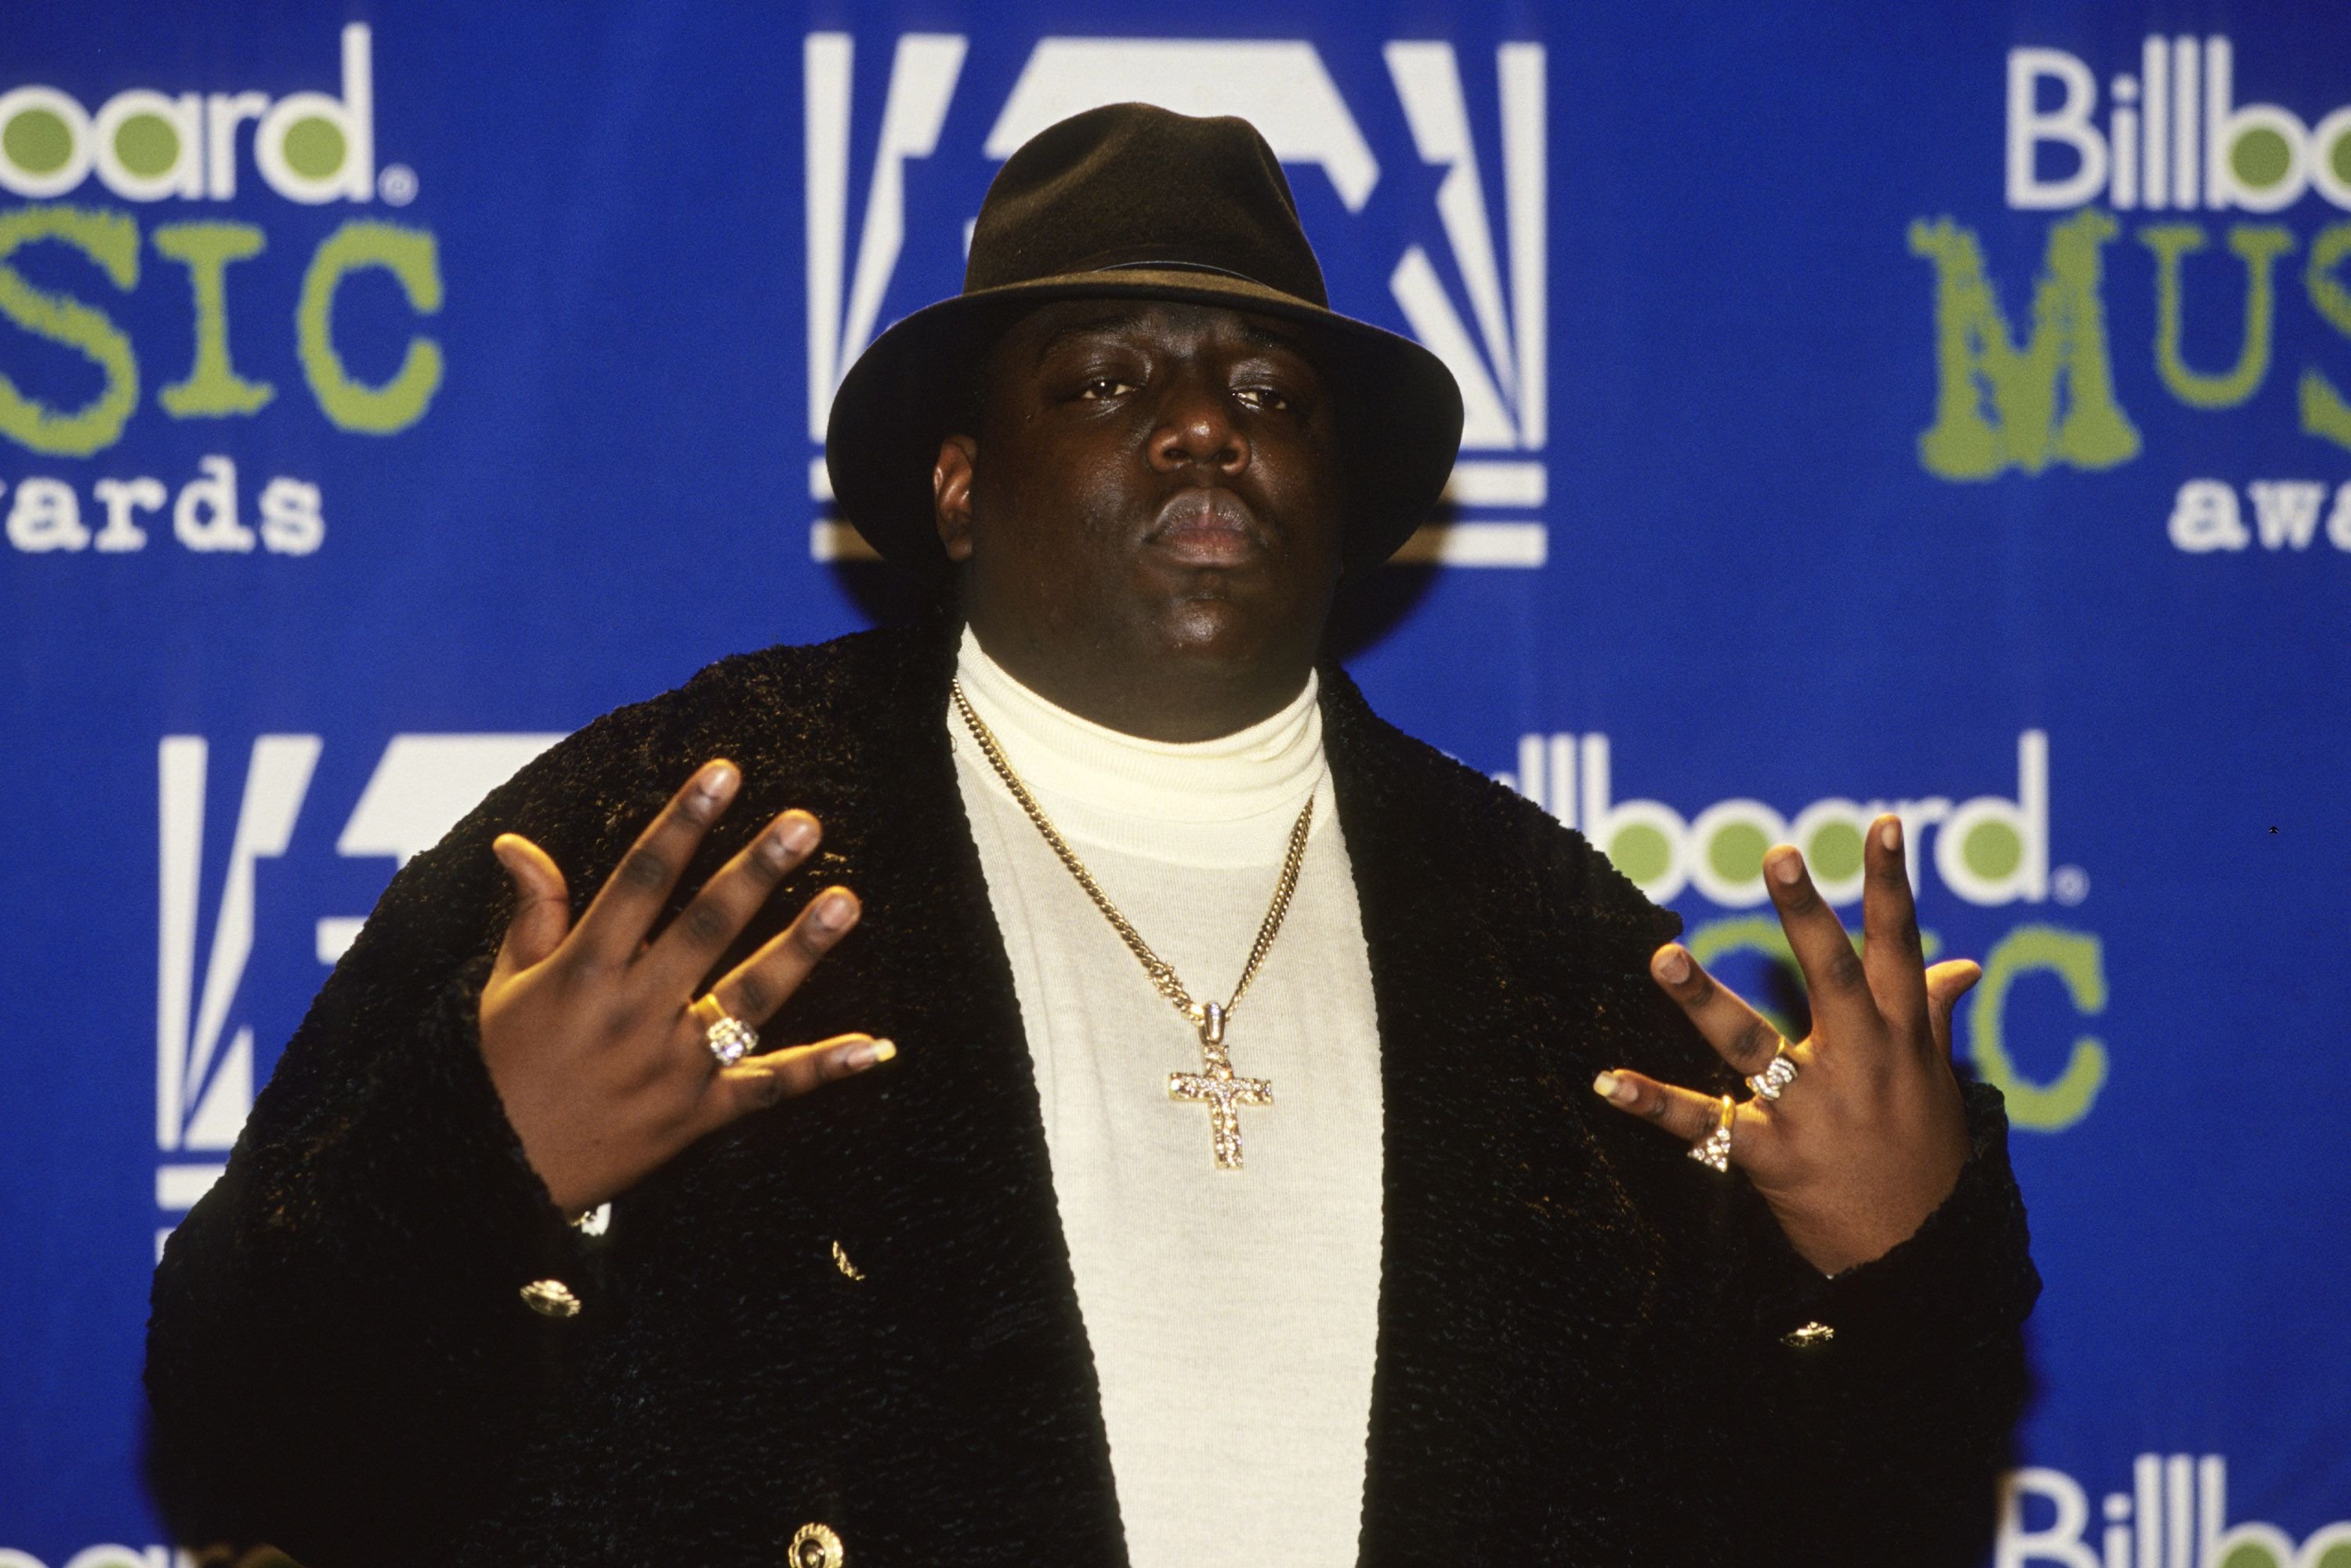 American rapper Notorious B.I.G. (born Christopher Wallace) at the 1995 Billboard Music Awards on December 6, 1996. | Photo: Getty Images